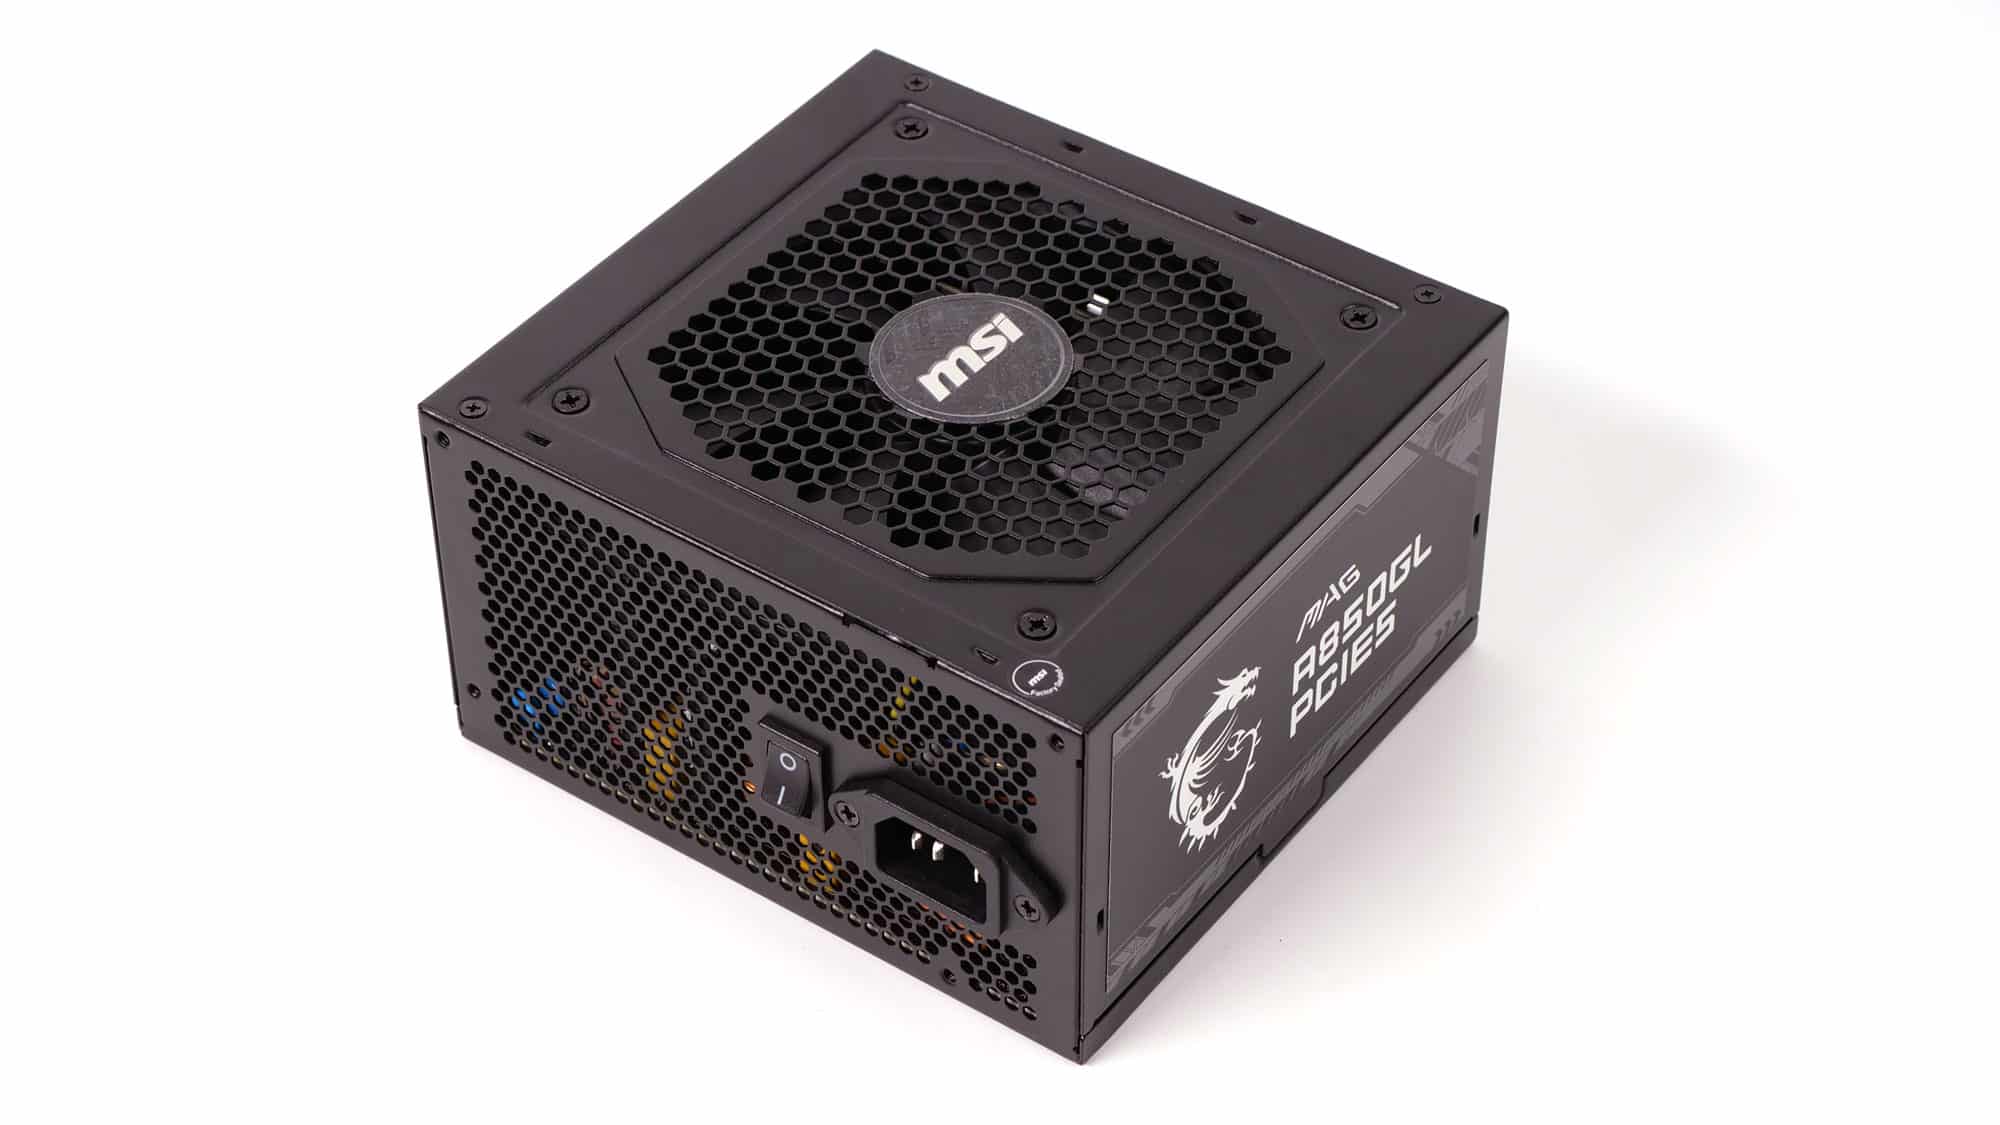 MSI MAG A850GL PCIE5 850W PSU Review - Hardware Busters